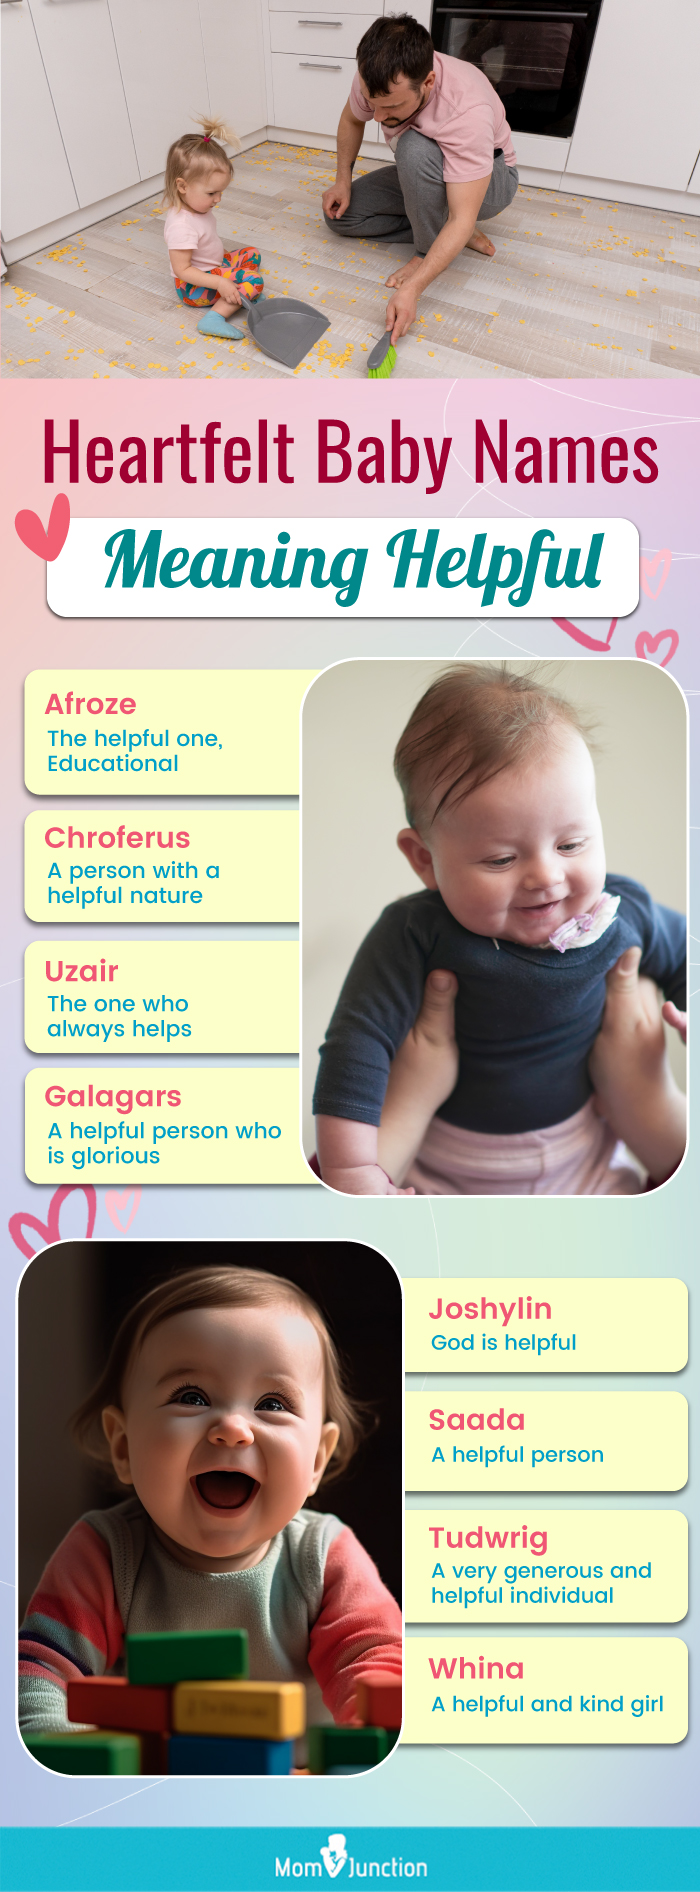 heartfelt baby names meaning helpful (infographic)